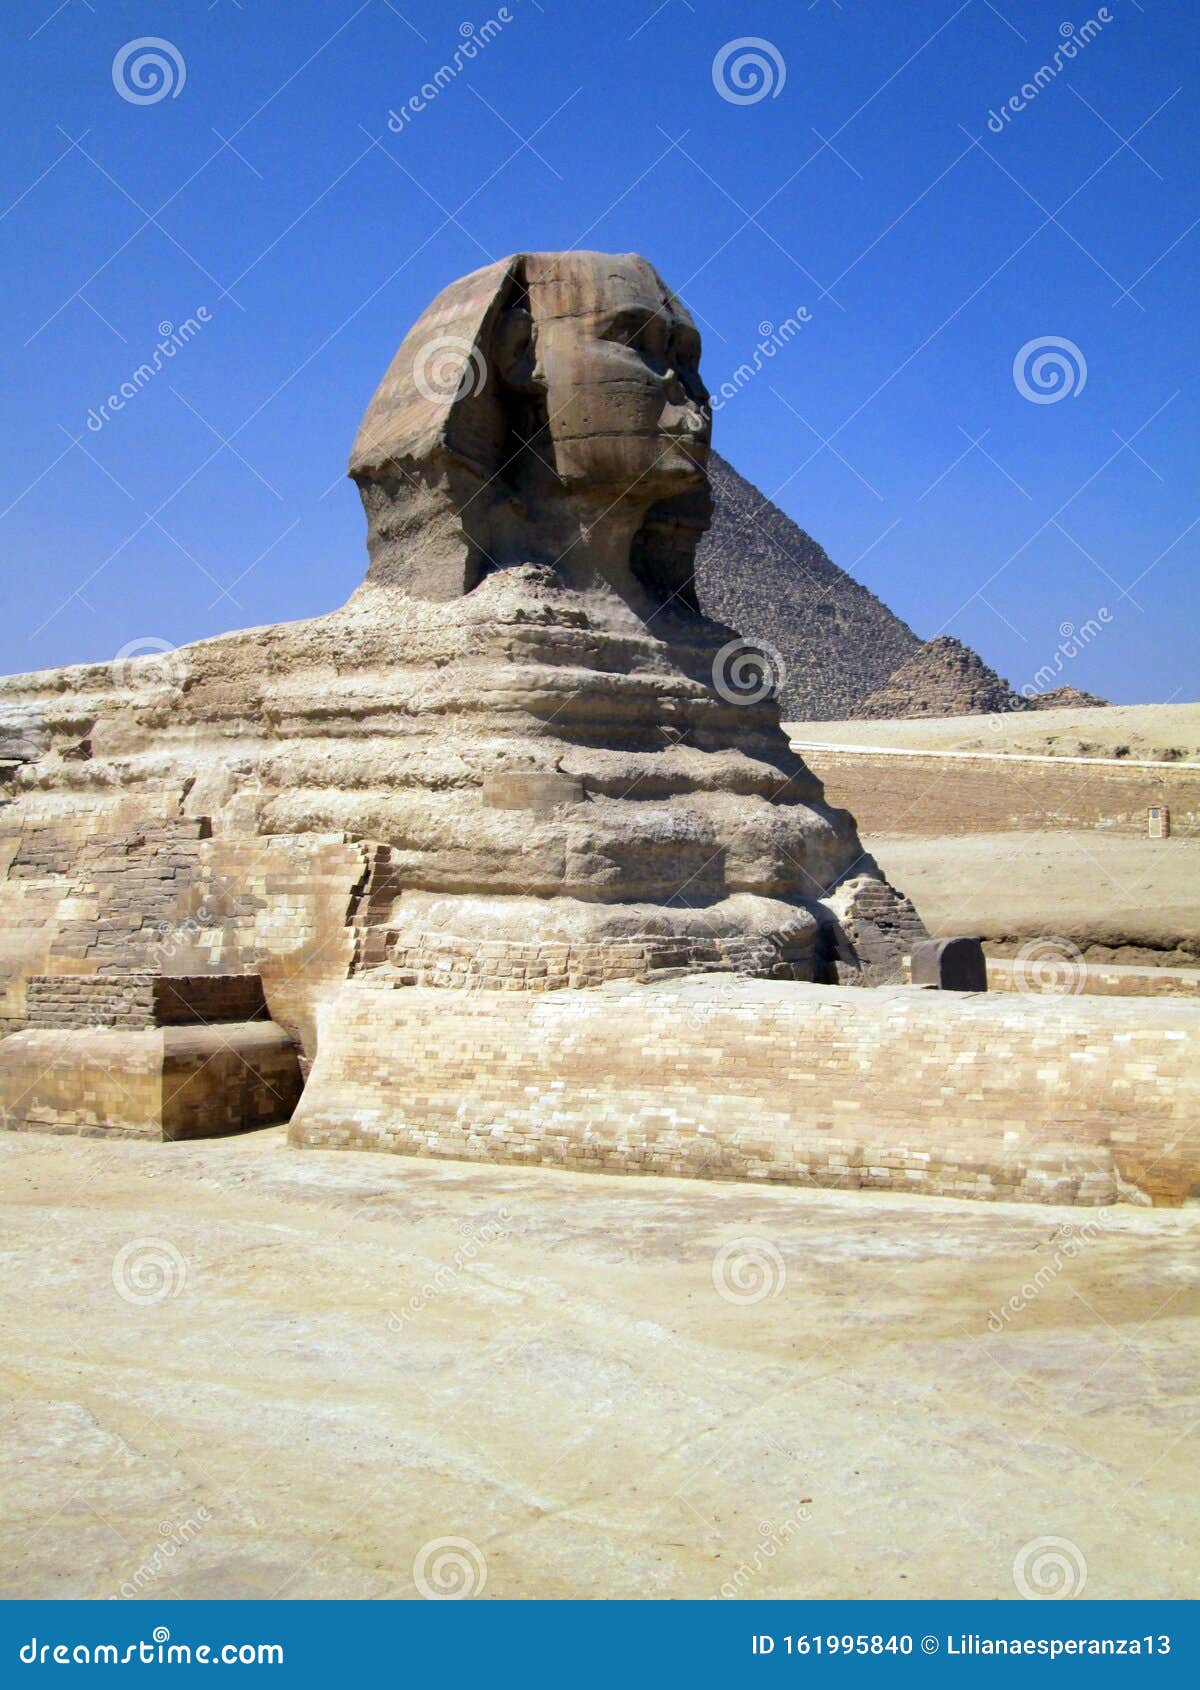 sphinxes of giza egypt africa